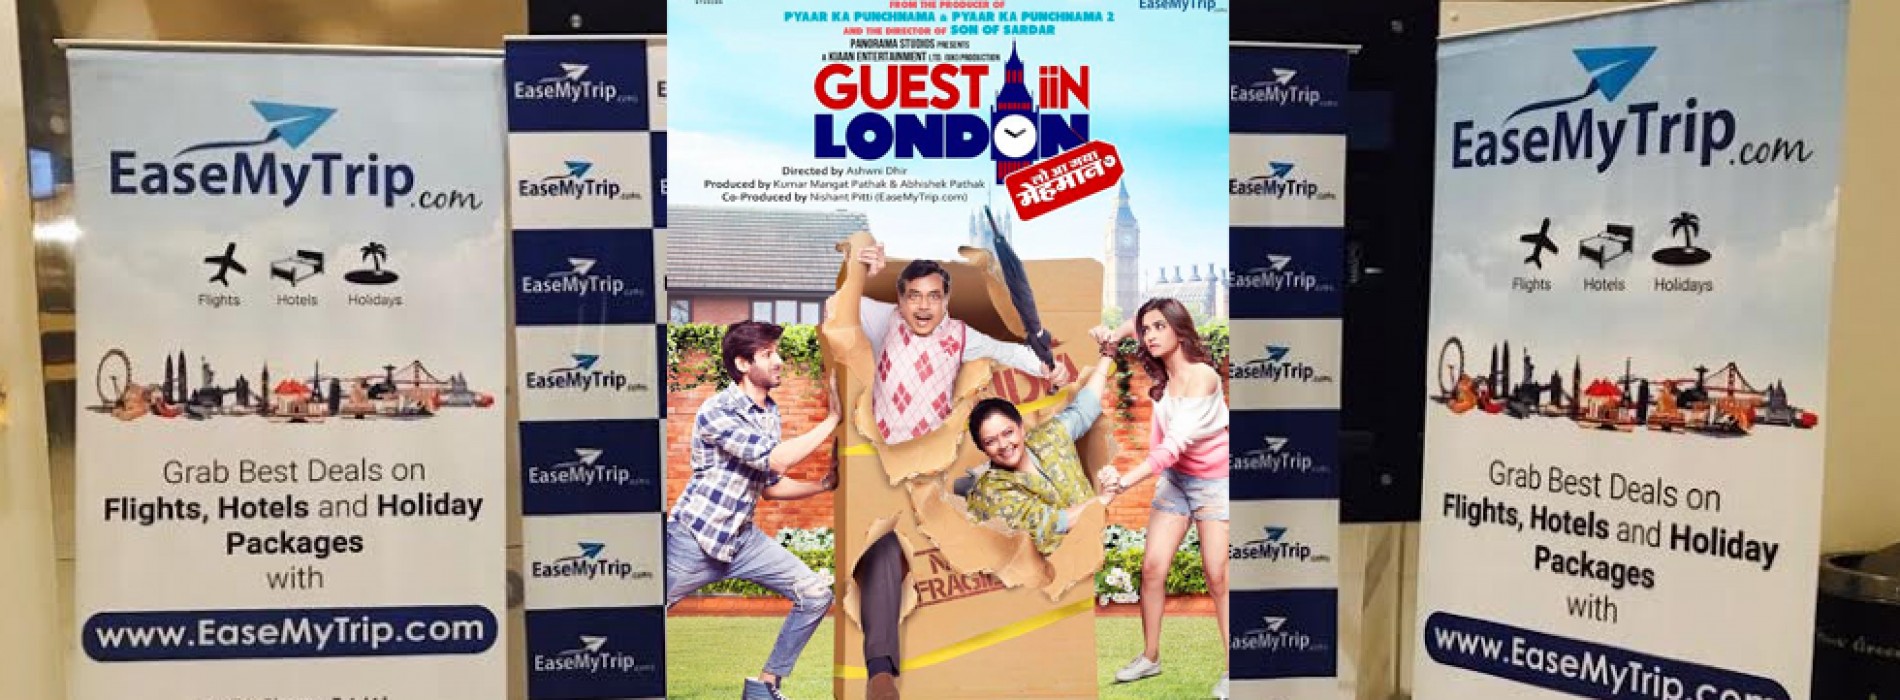 Special screening of the Film ‘Guest Iin London’ by EaseMyTrip